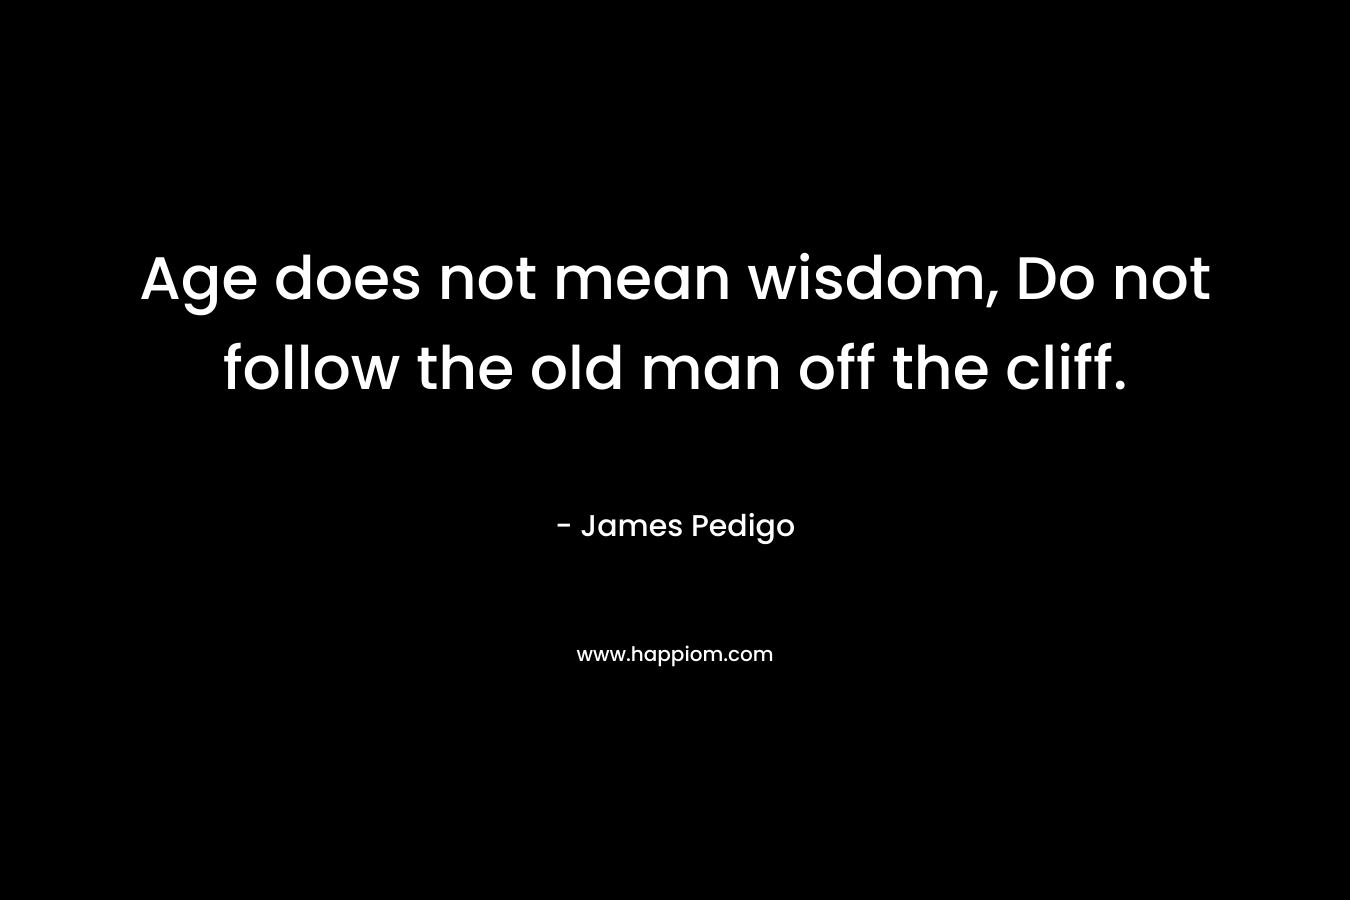 Age does not mean wisdom, Do not follow the old man off the cliff. – James Pedigo